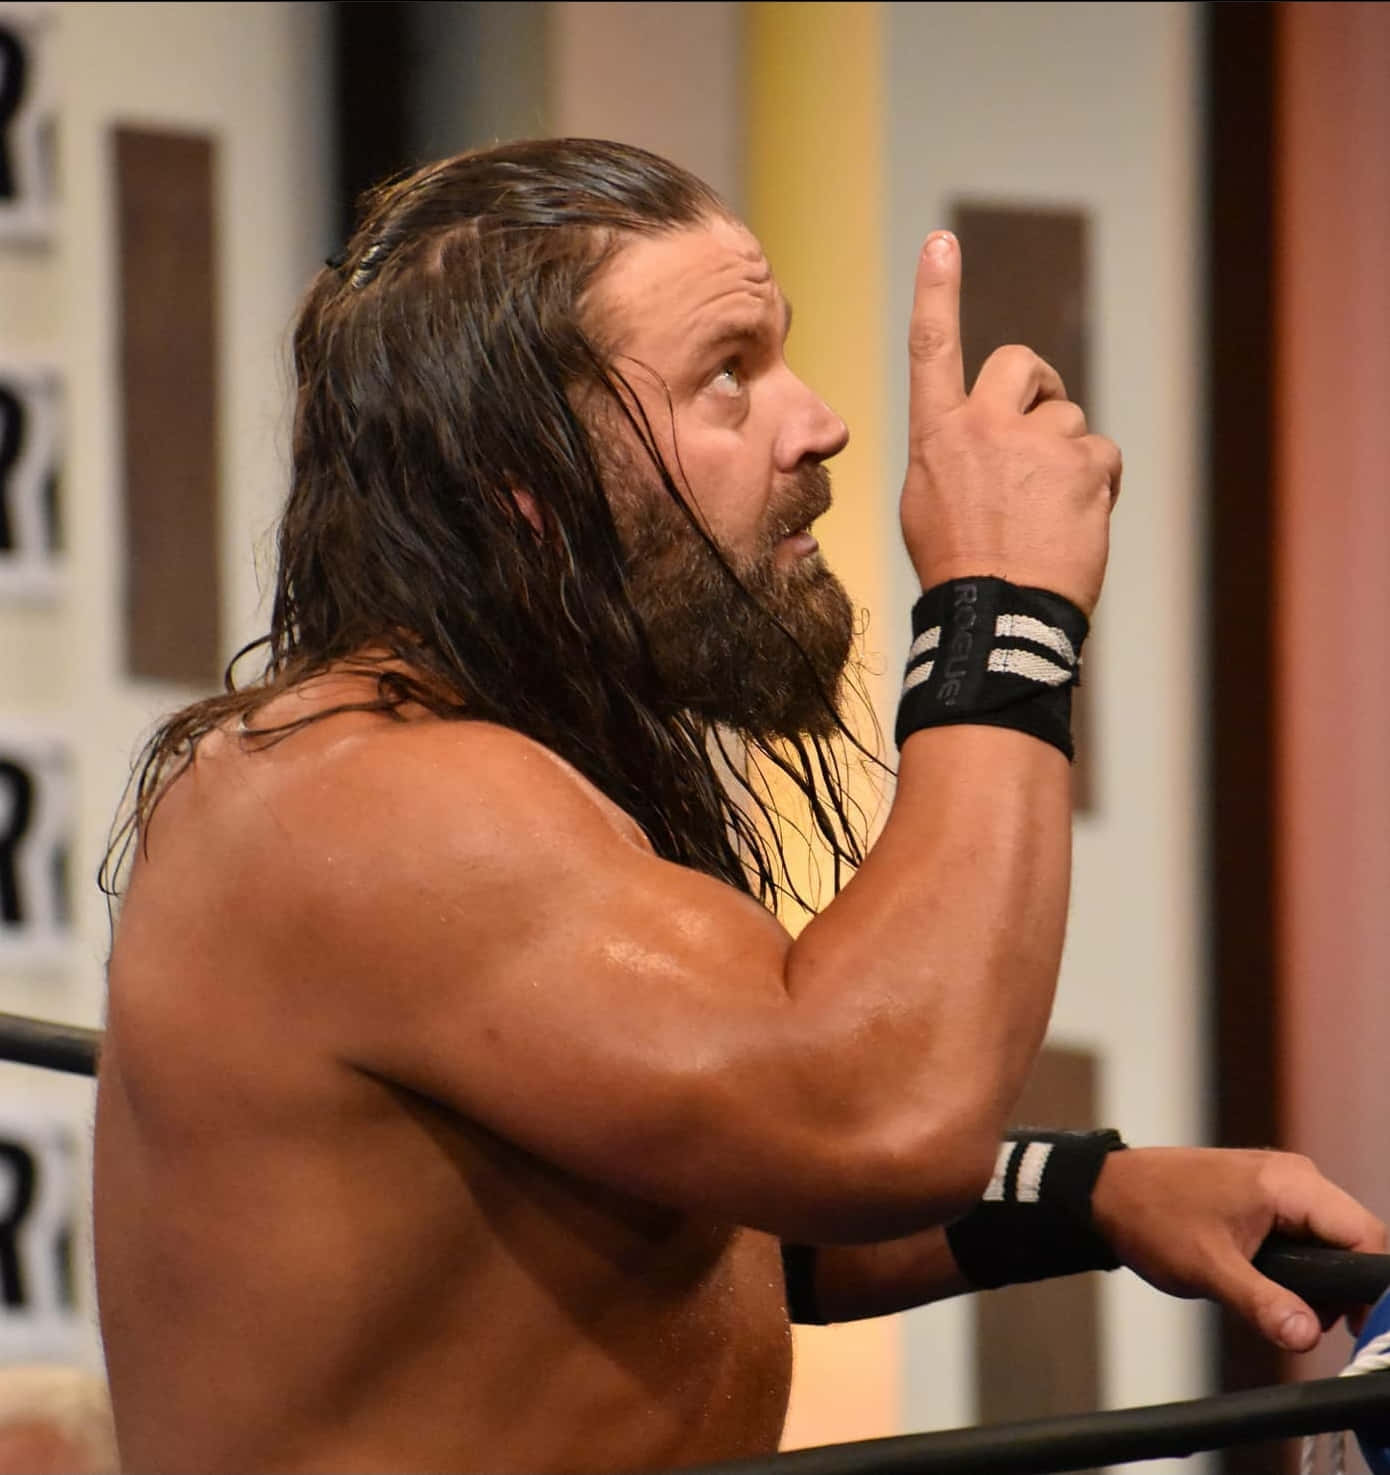 American Professional Wrestler James Storm In A Private Gym Wallpaper